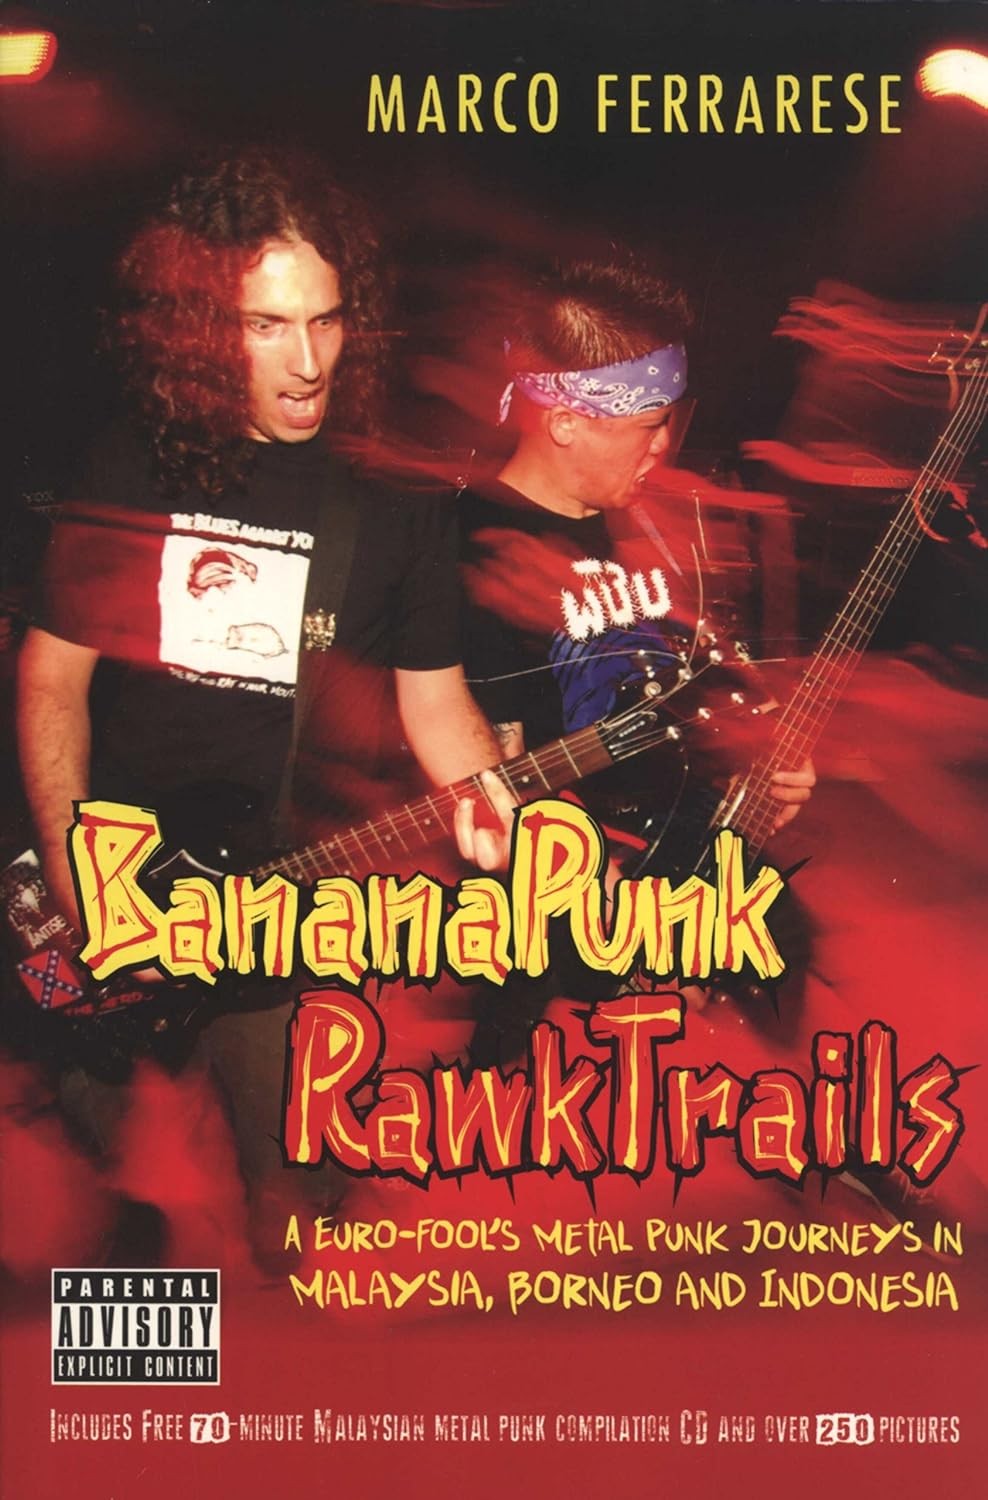 Banana Punk Rawk Trails: A Euro Metal Punk Journey In Malaysia, Borneo and Indonesia